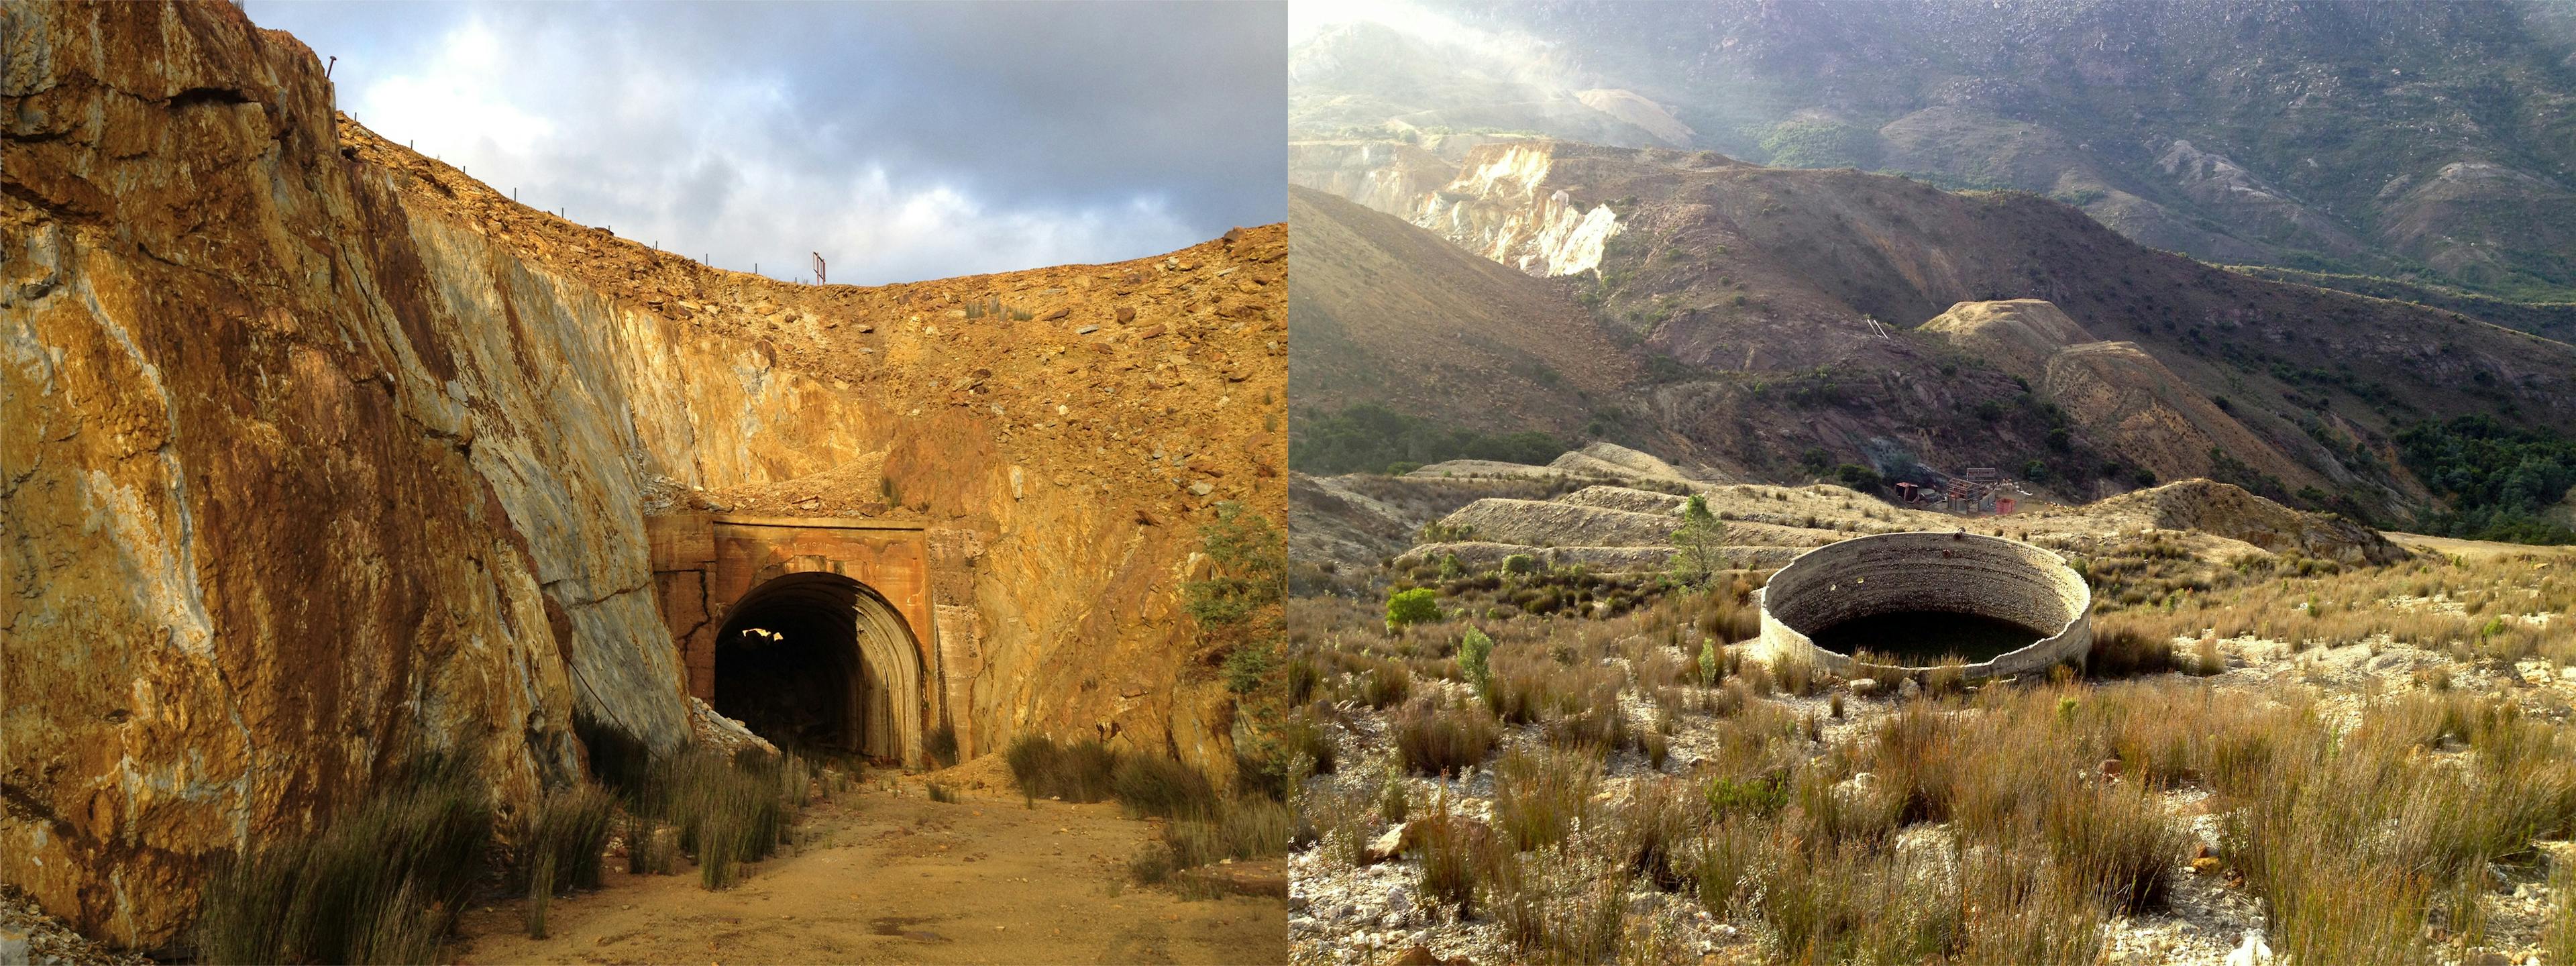 Openings and remnants of the mines